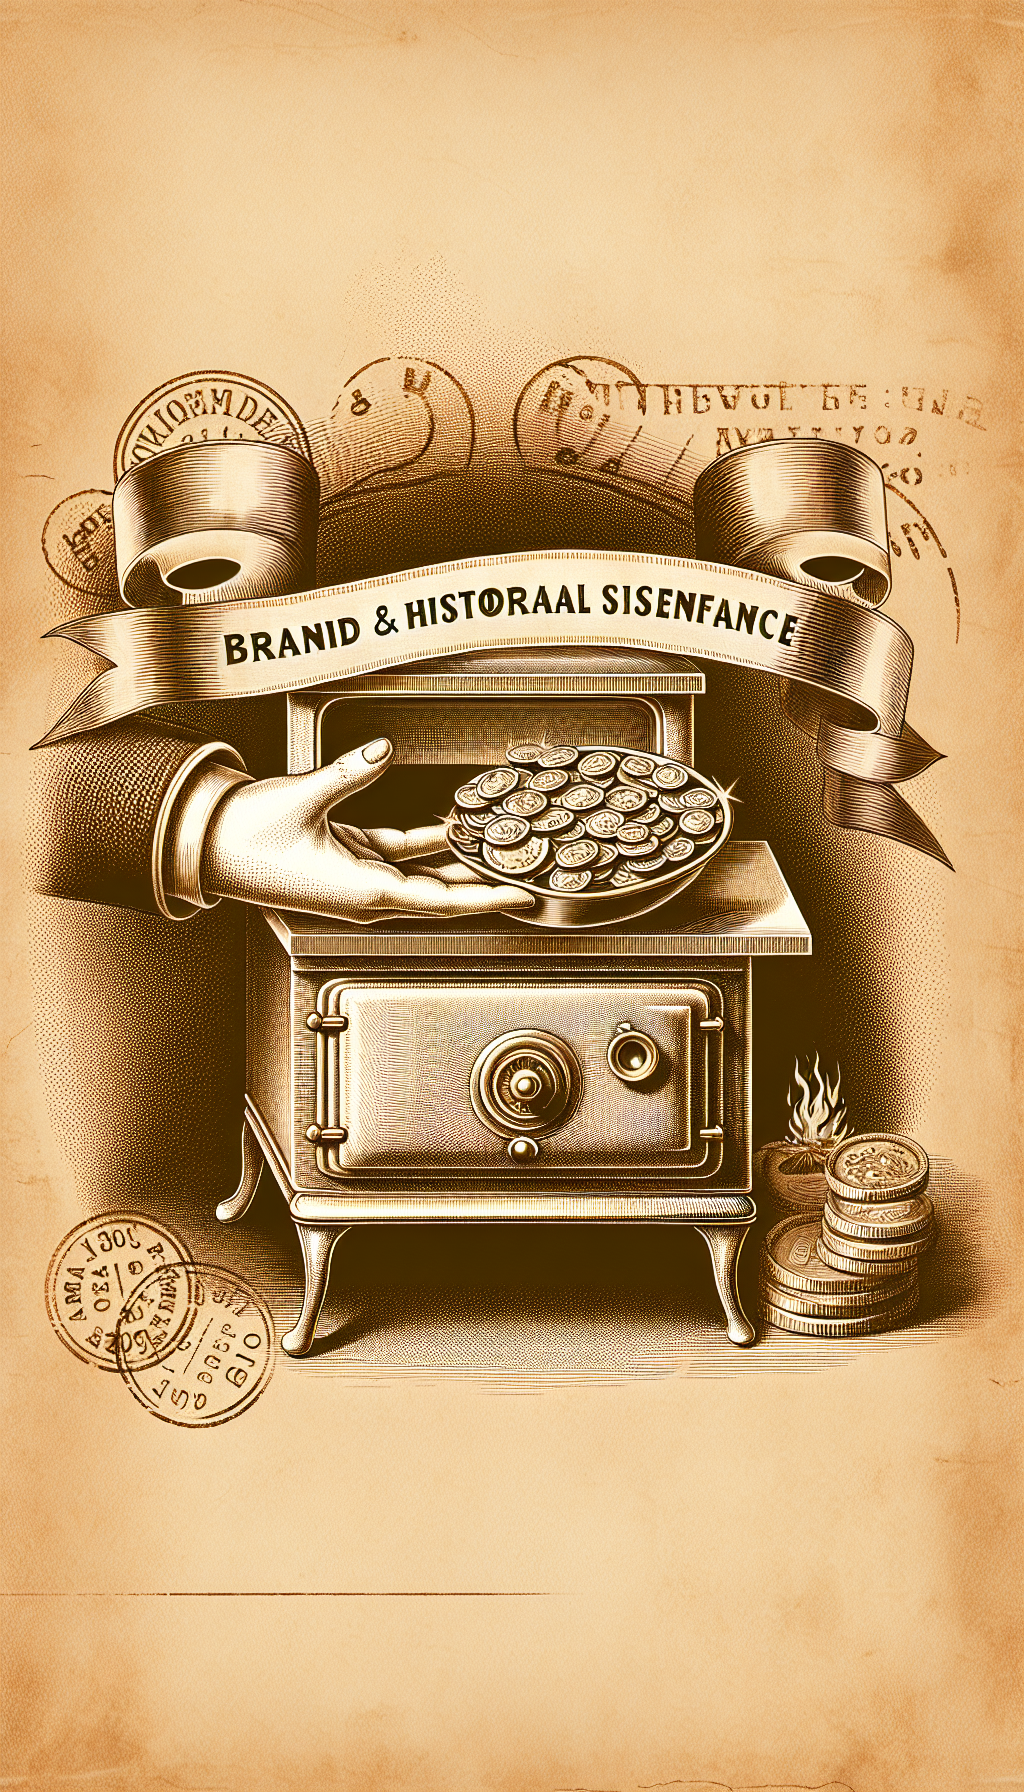 A sepia-toned illustration depicts a hand gently lifting an antique stove, revealing a treasure chest within its open oven door, overflowing with gold coins and jewels. A ribbon unfurls from the stove's handle with the words "Brand & Historical Significance" on it, and in the background, faint ink-stamped dates and logos adorn the scene, symbolizing the stove's rich history.